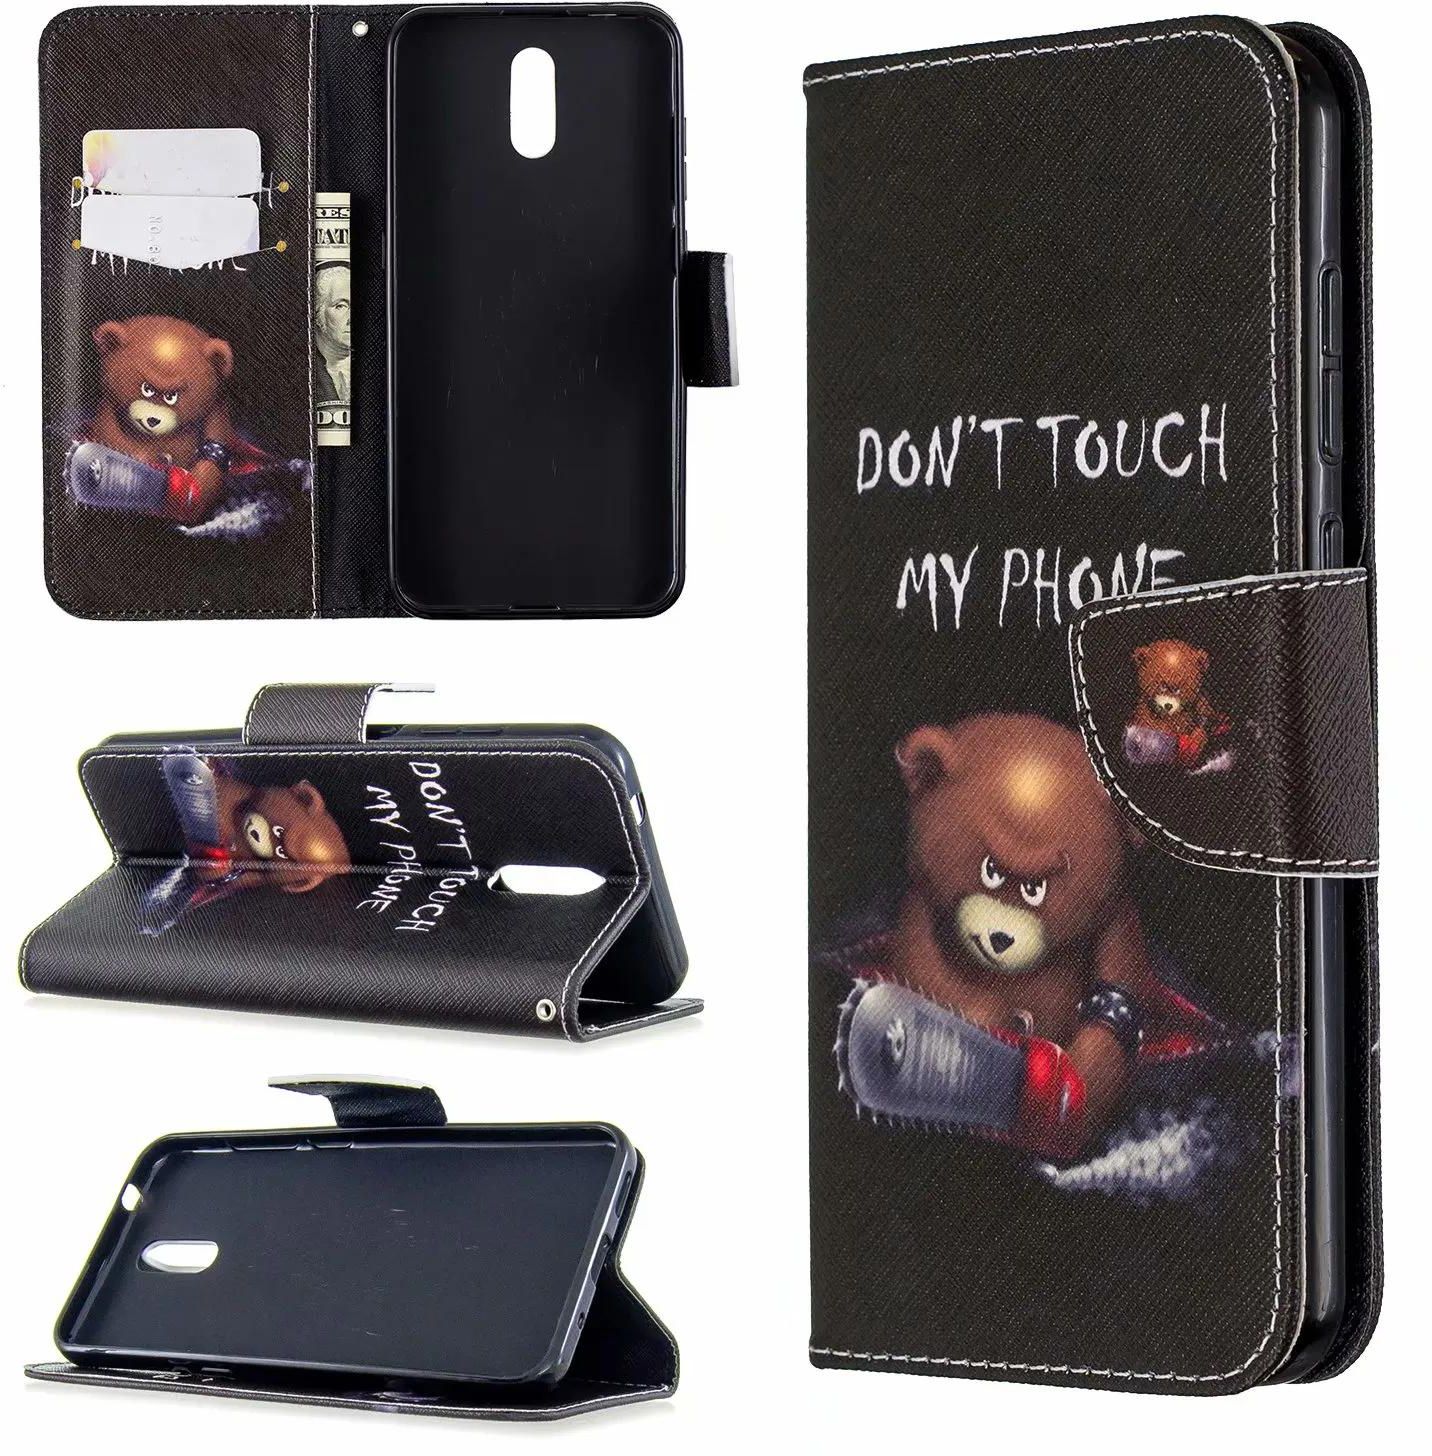 Nokia 2.3 Case, Flip PU Leather Wallet Phone Bag Cover for Nokia 2.3 - Don't touch my phone